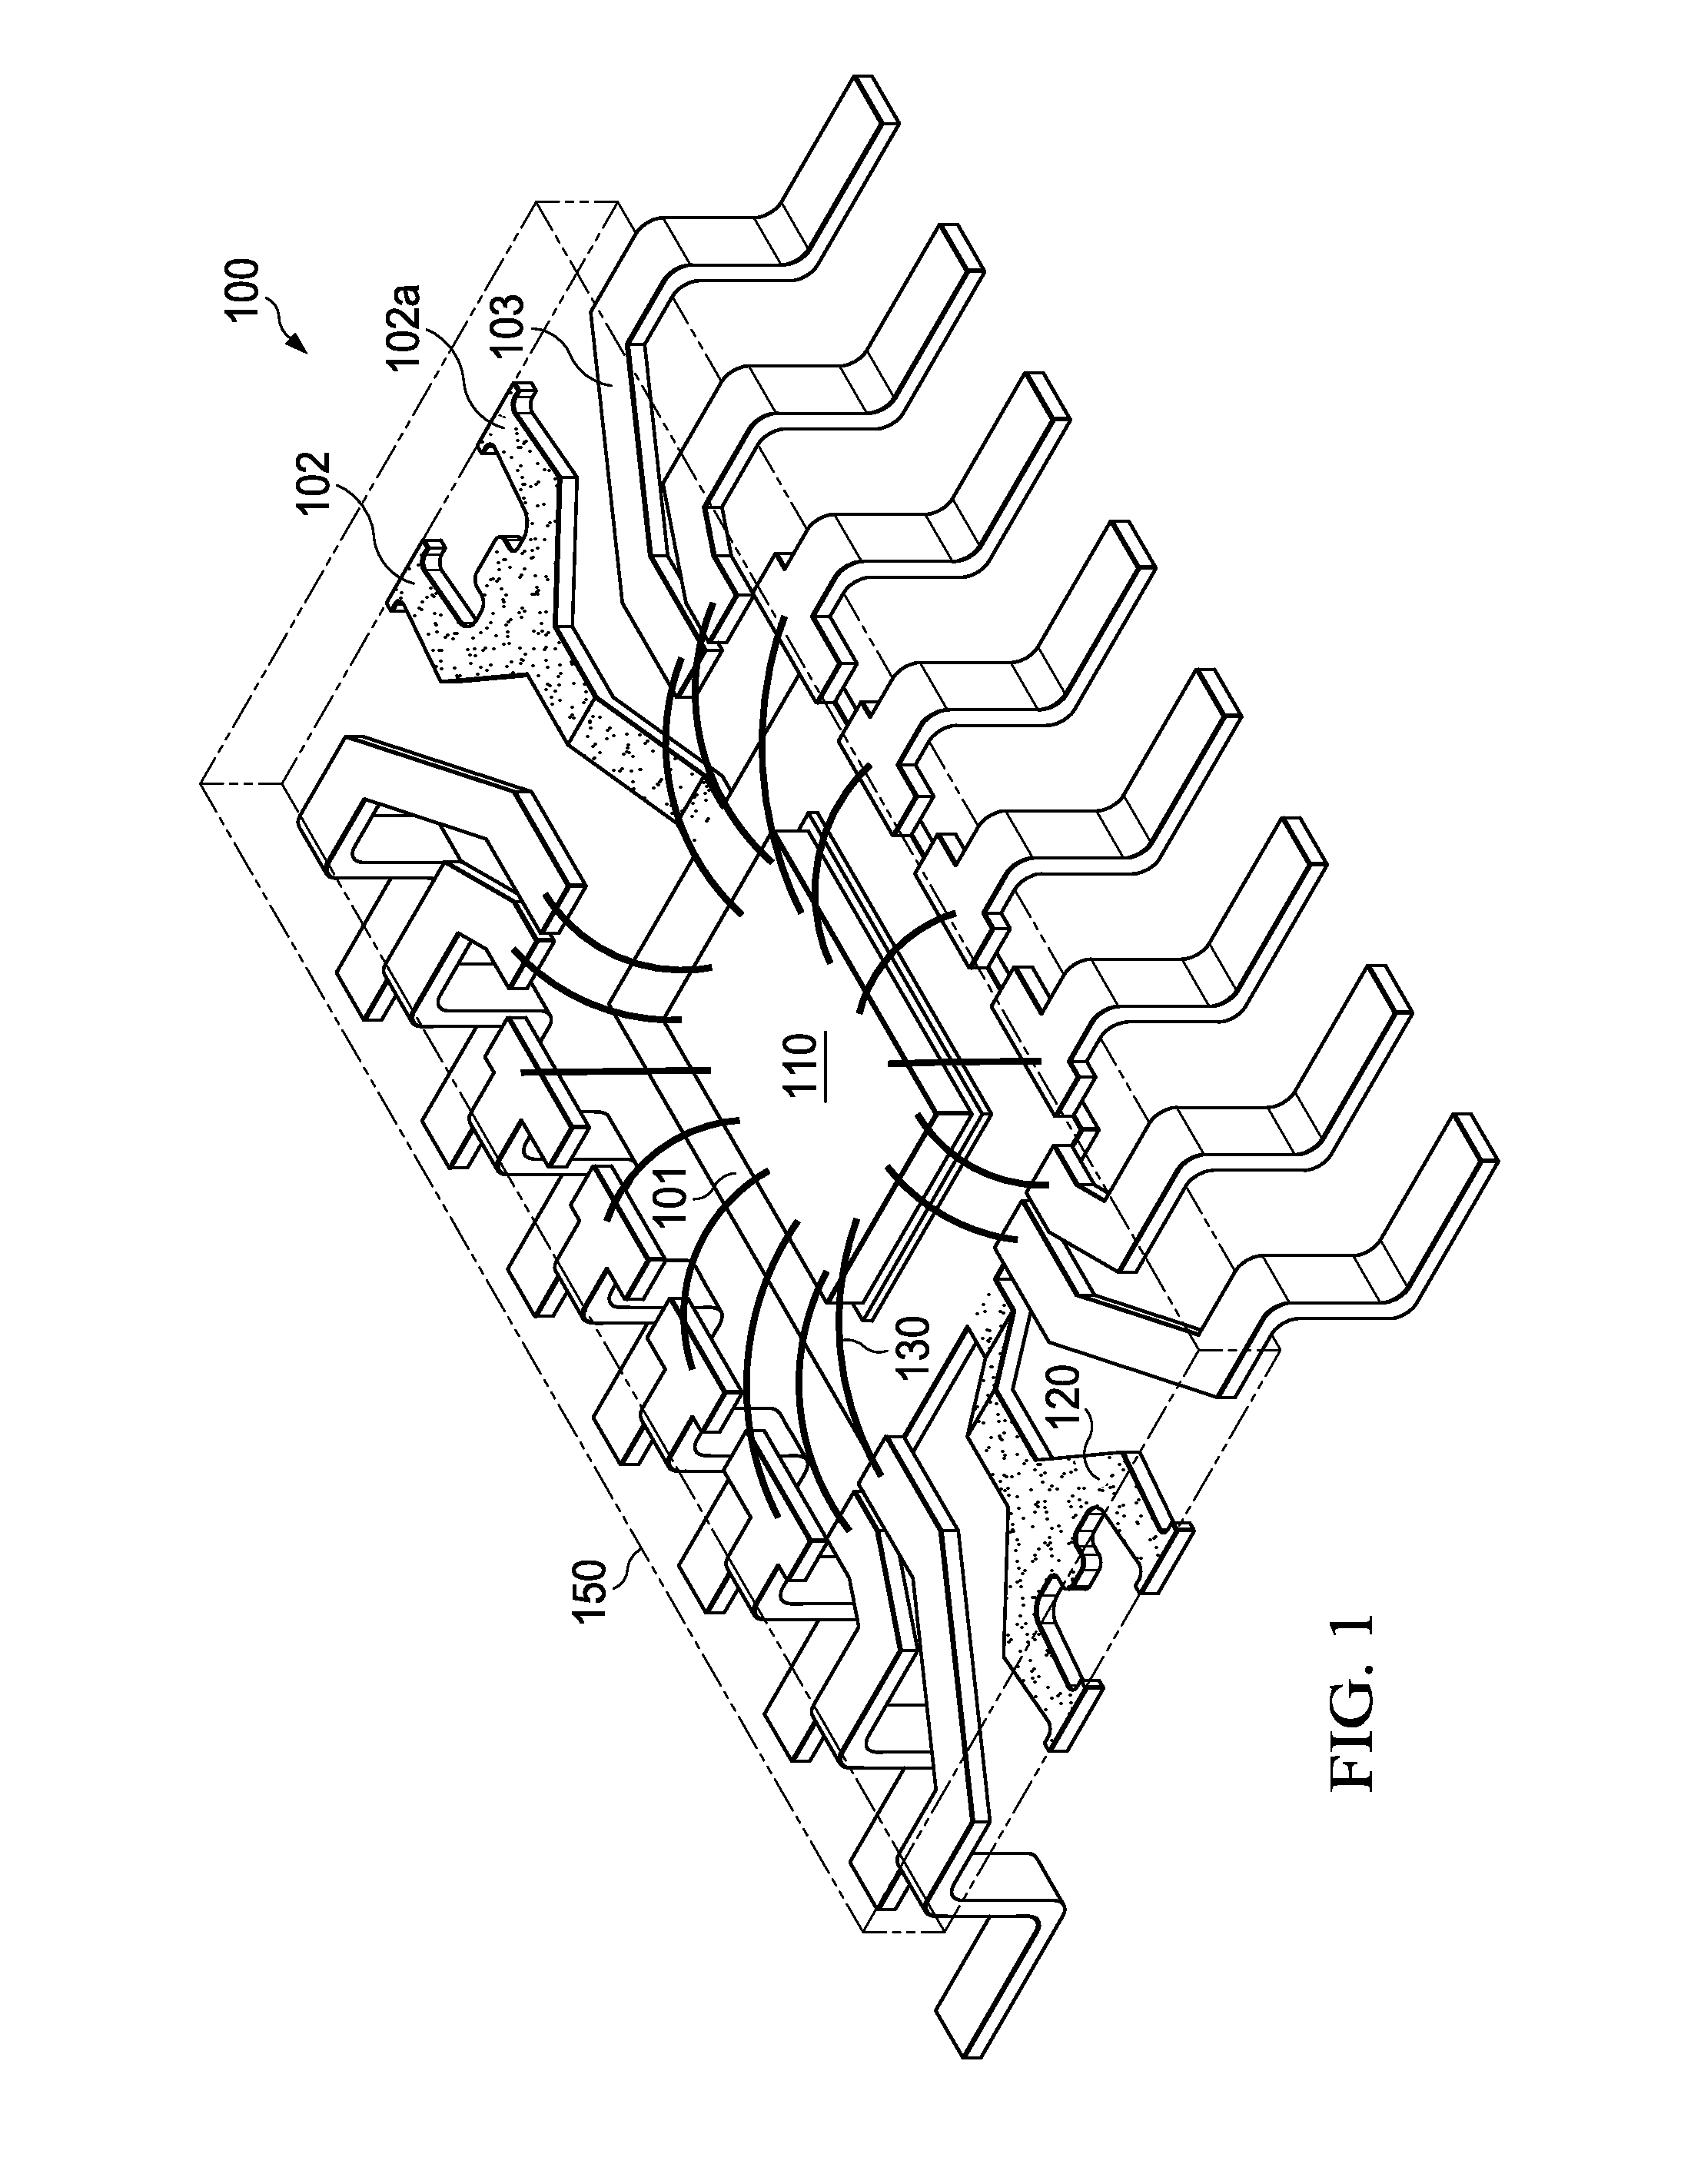 Packaged semiconductor device having leadframe features as pressure valves against delamination